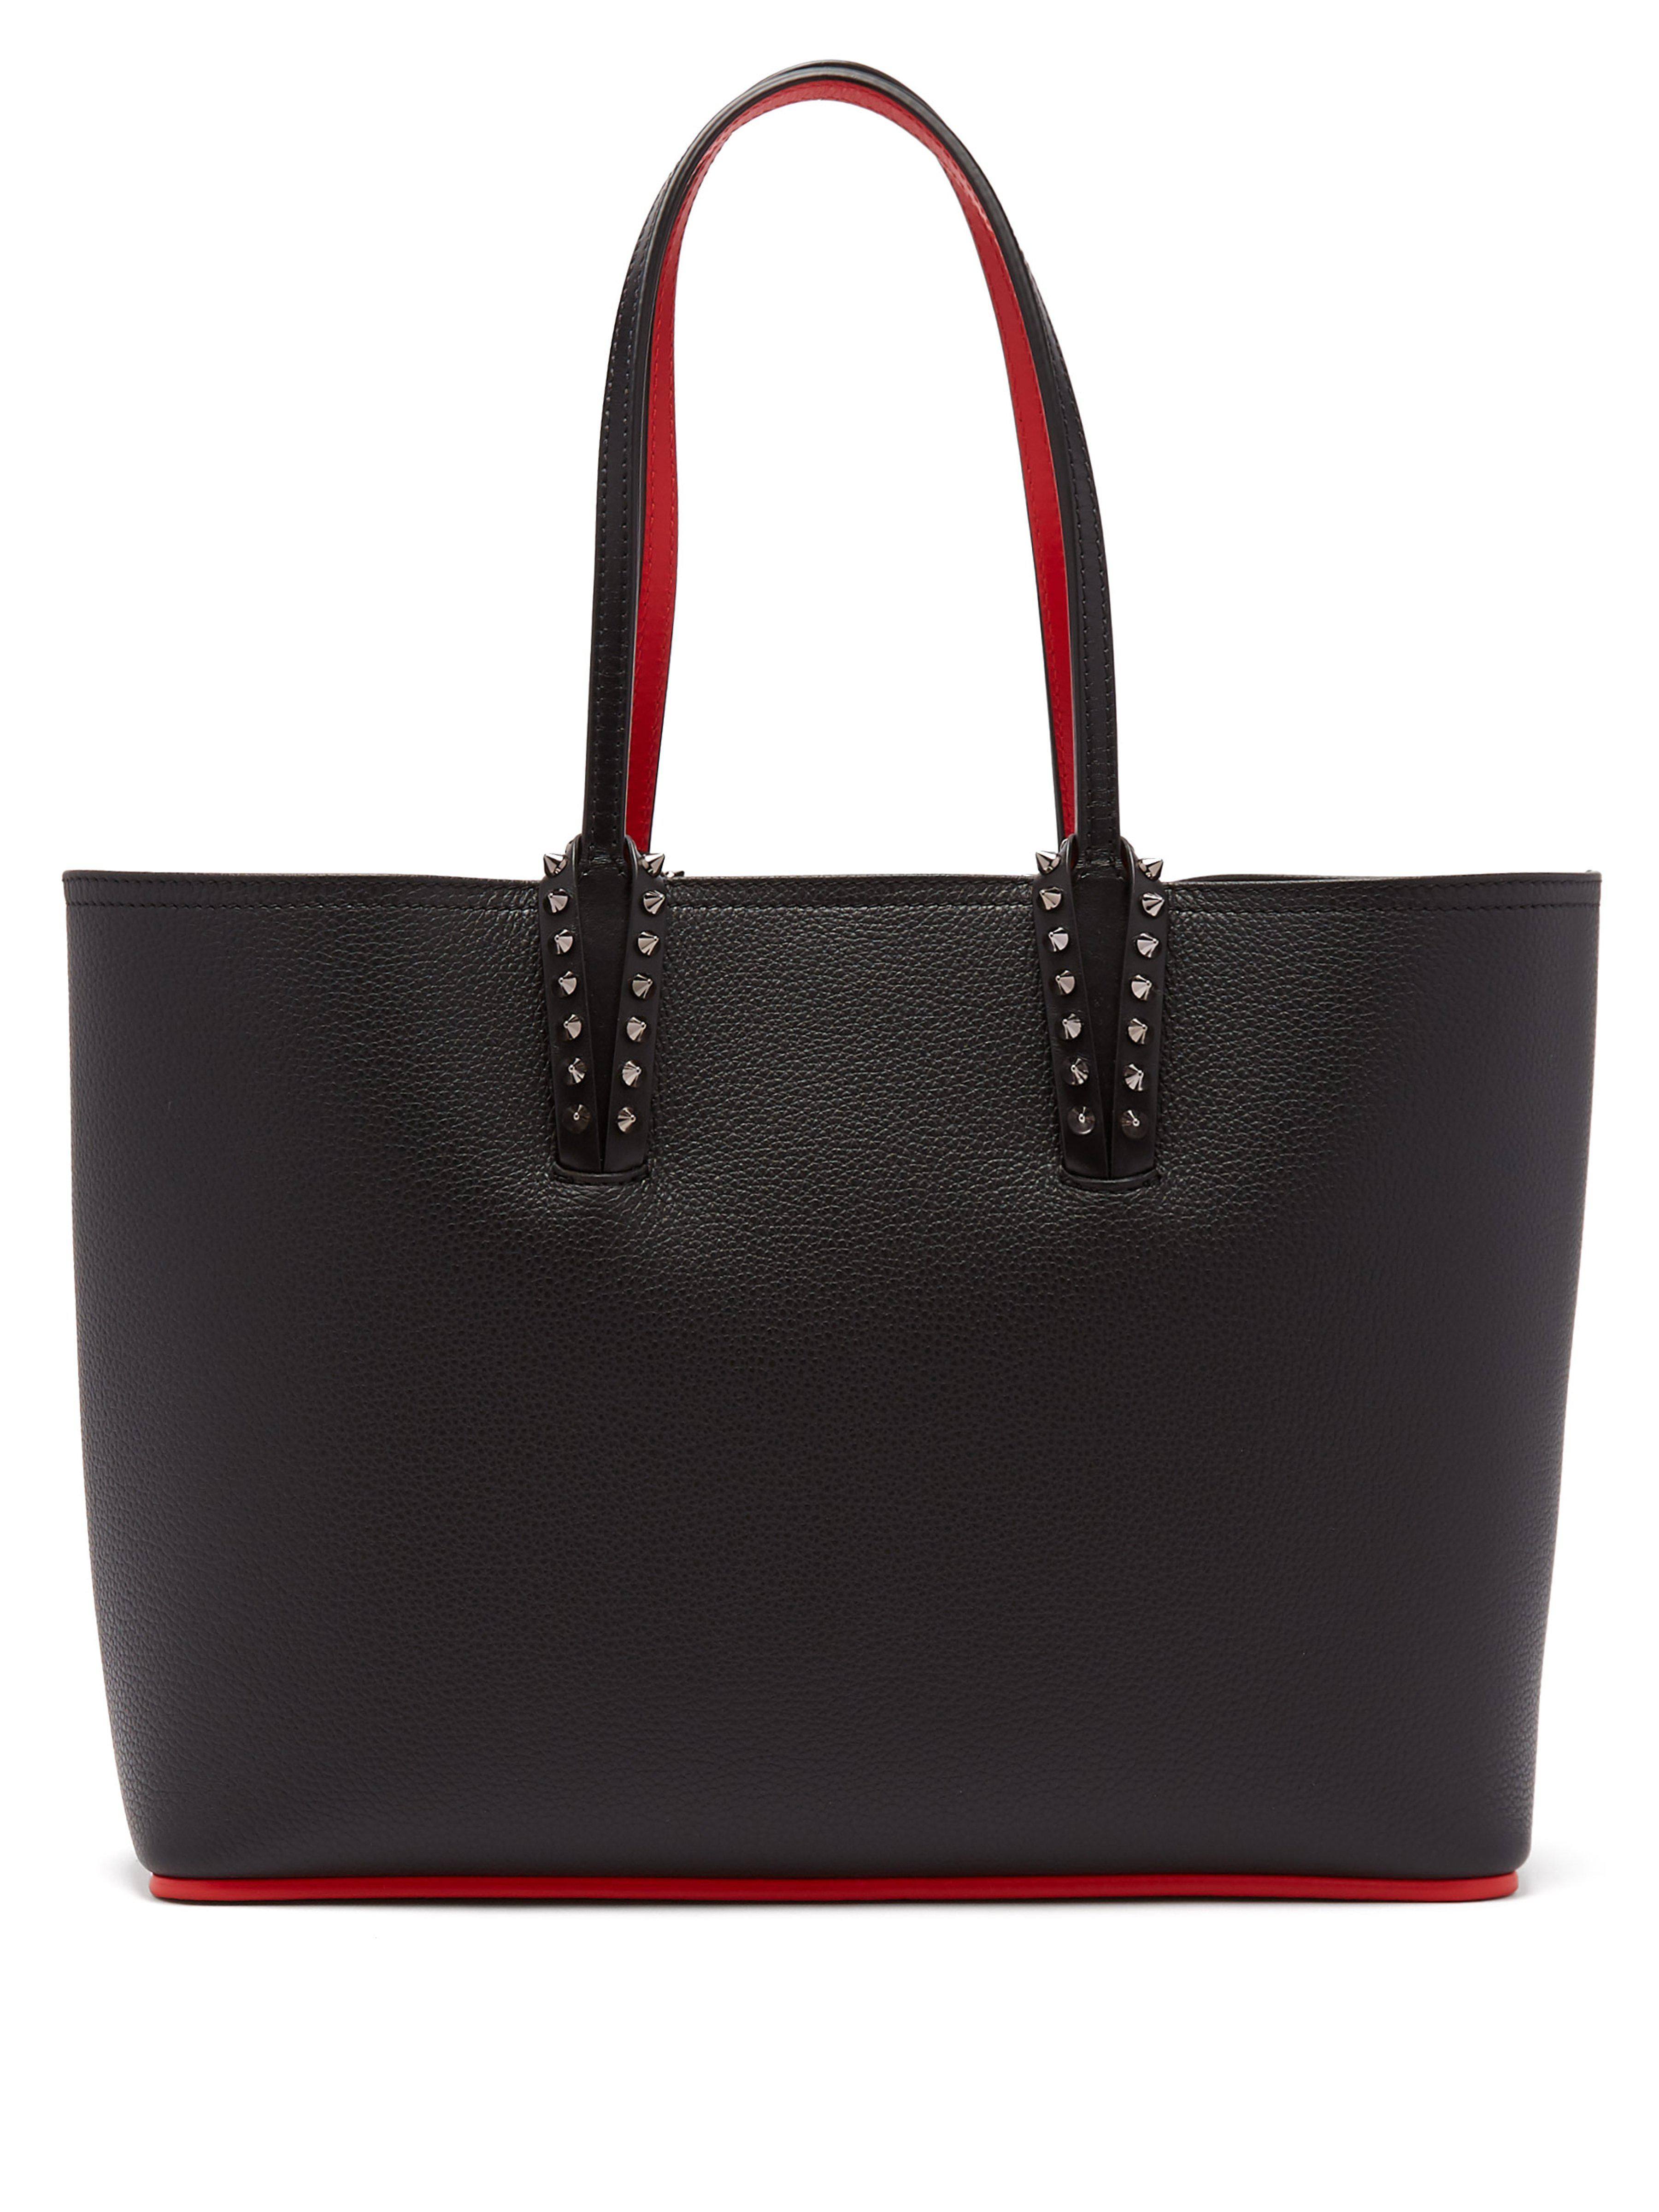 Christian Louboutin Cabata Small Spike Embellished Leather Tote in ...